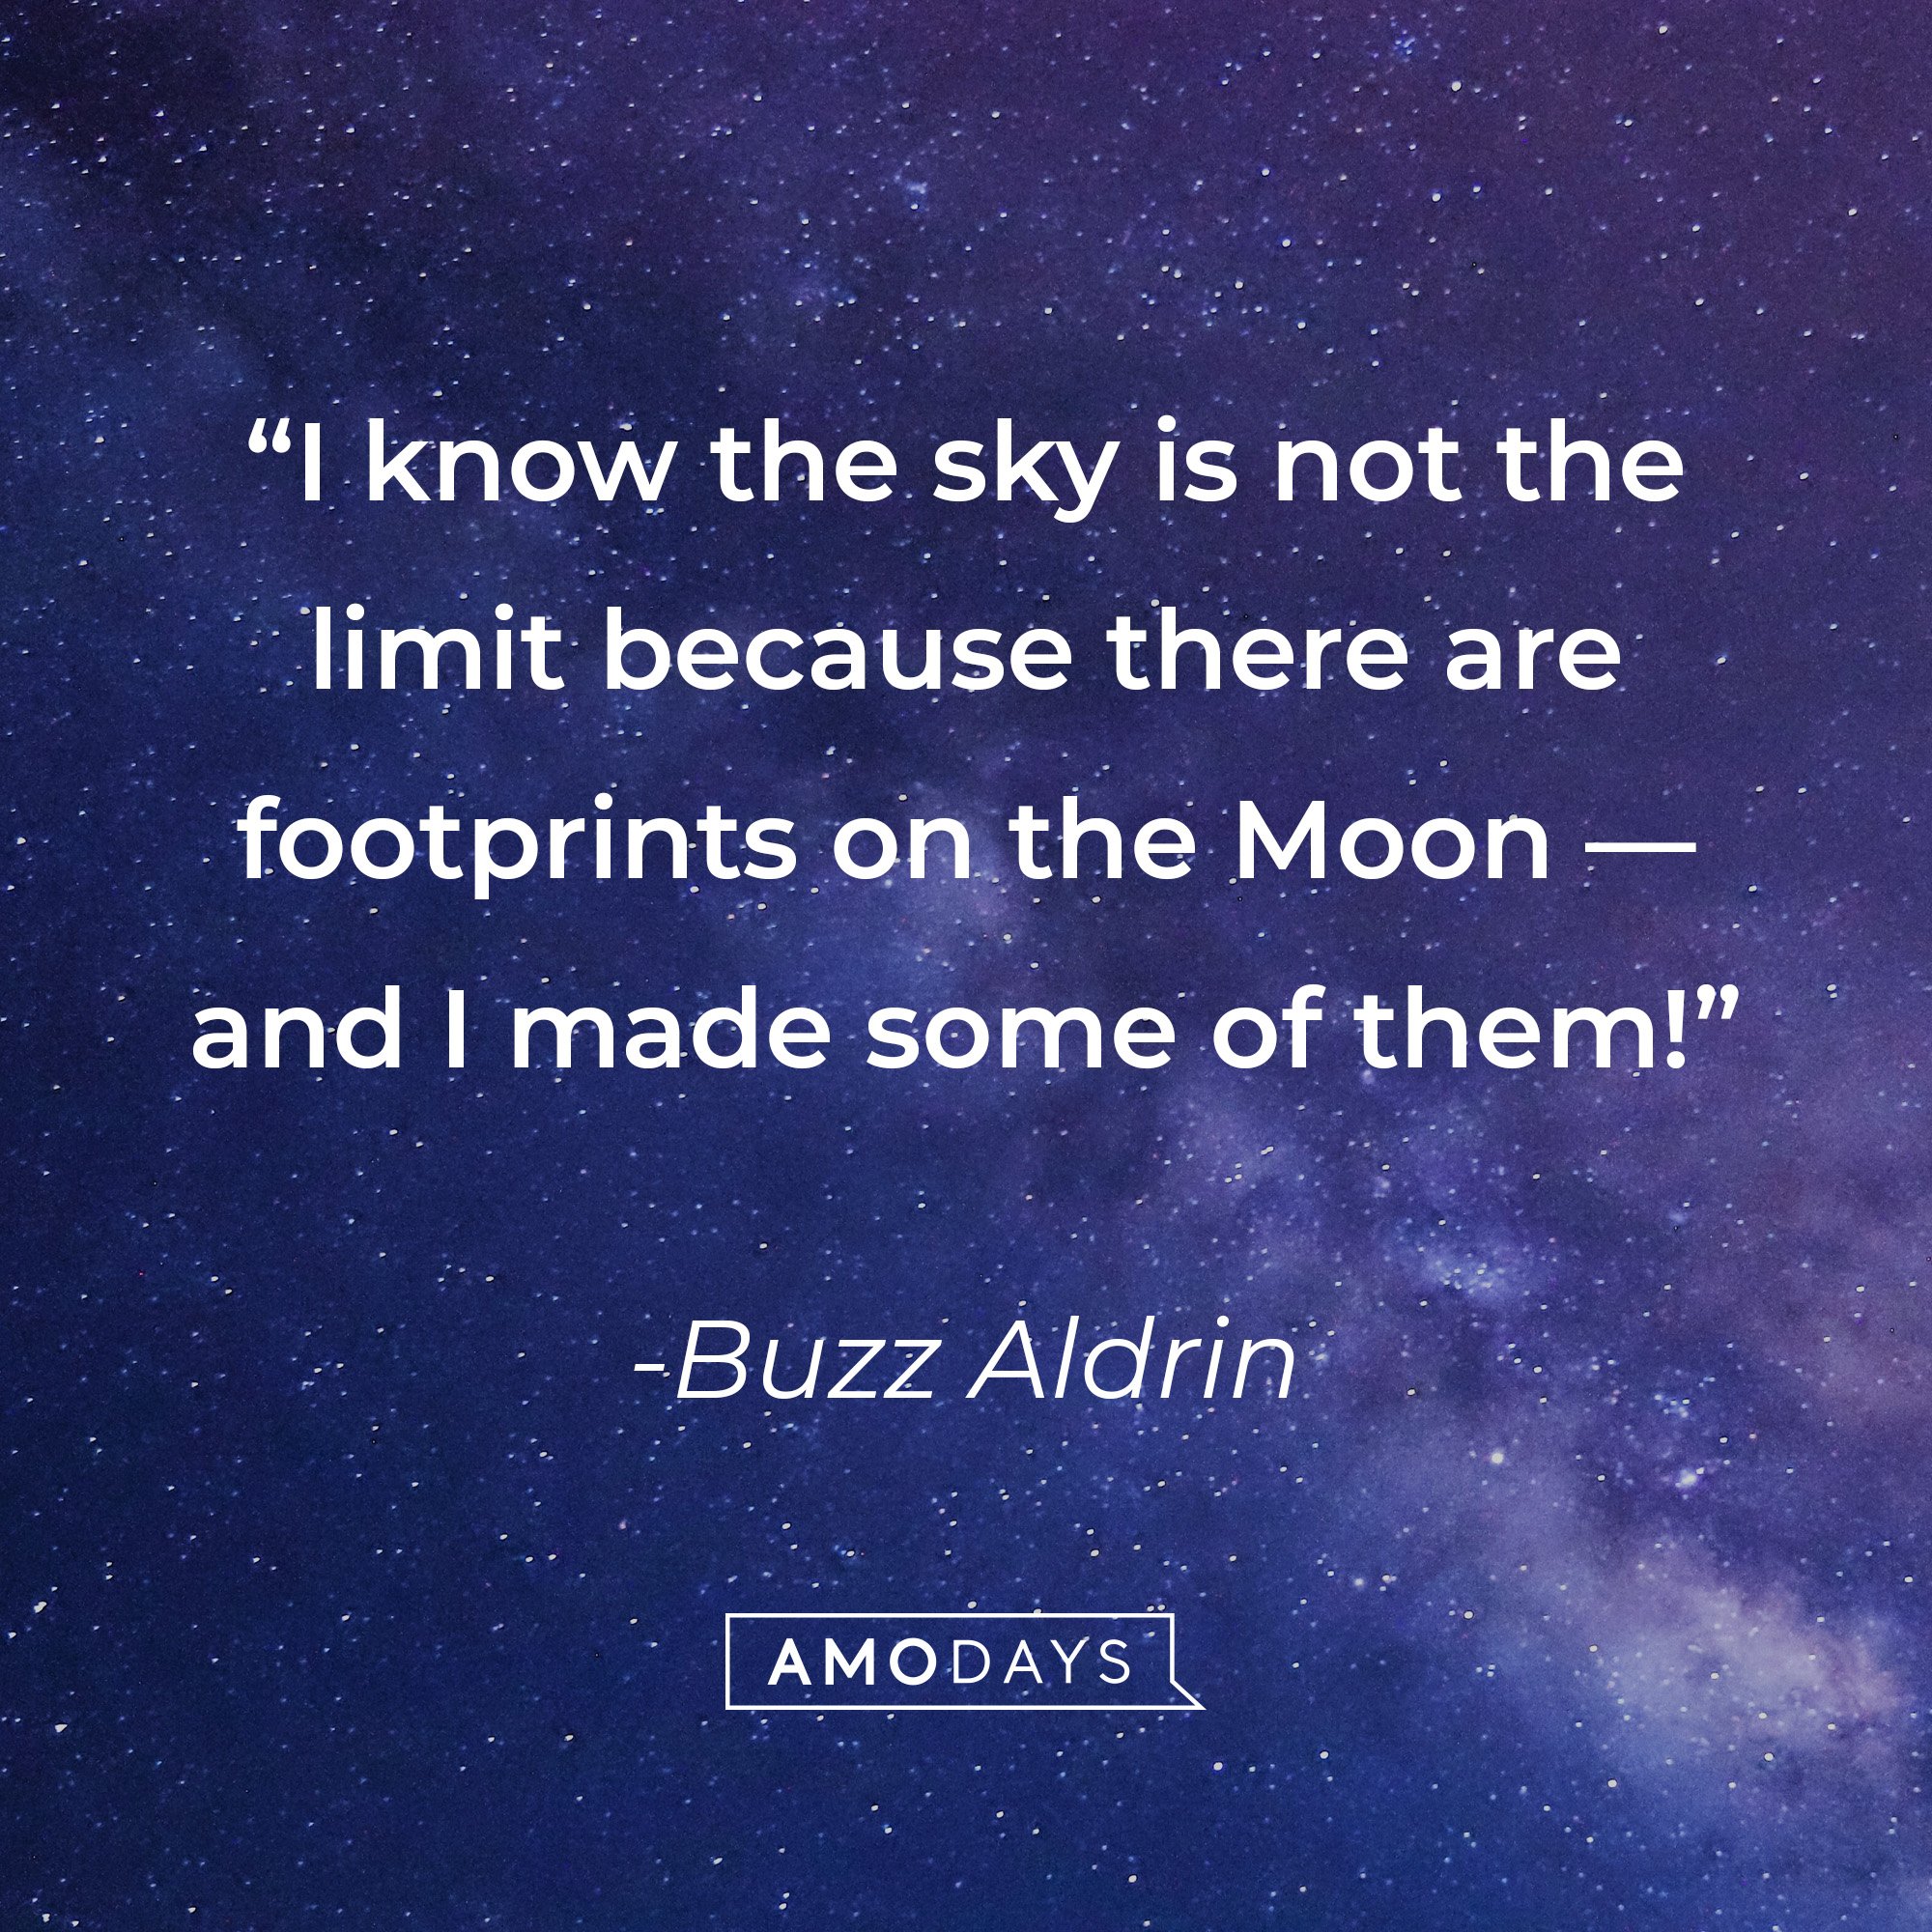 Buzz Aldrin’s quote: “I know the sky is not the limit because there are footprints on the Moon — and I made some of them!” | Image: AmoDays 